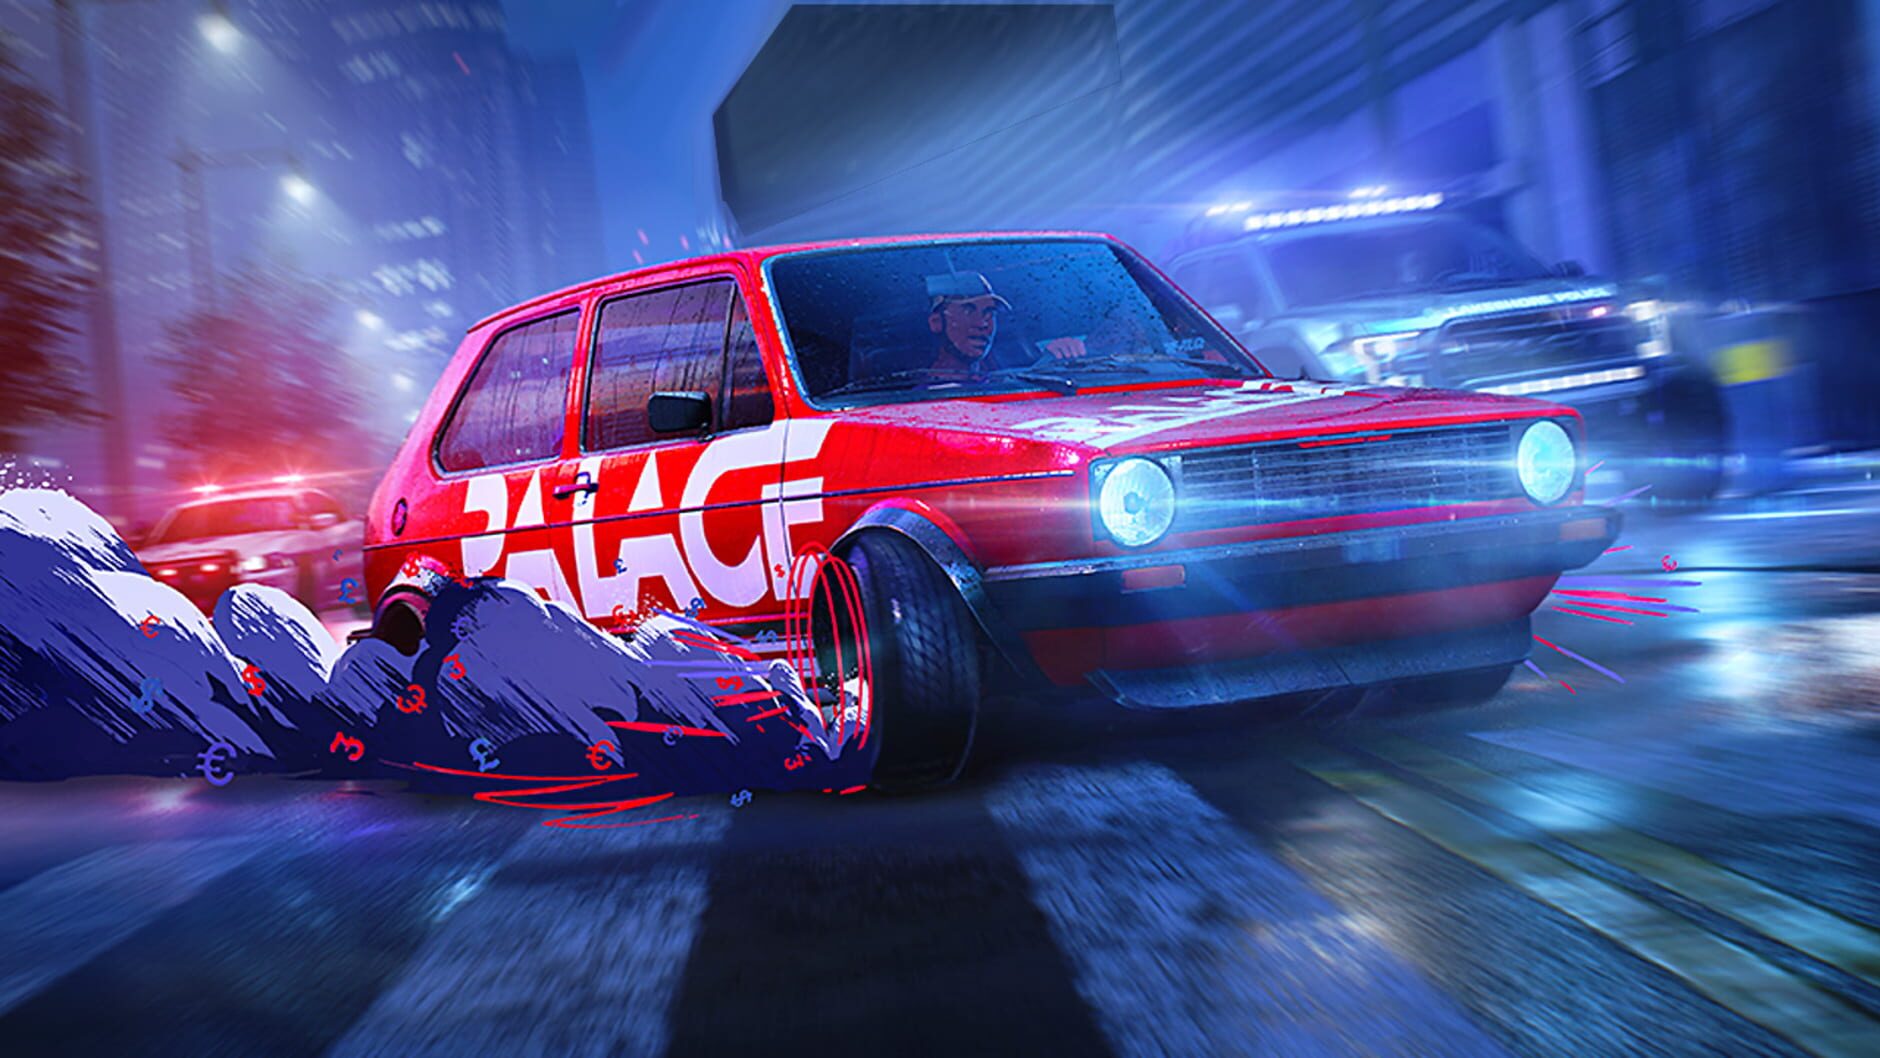 Screenshot for Need for Speed Unbound: Palace Edition